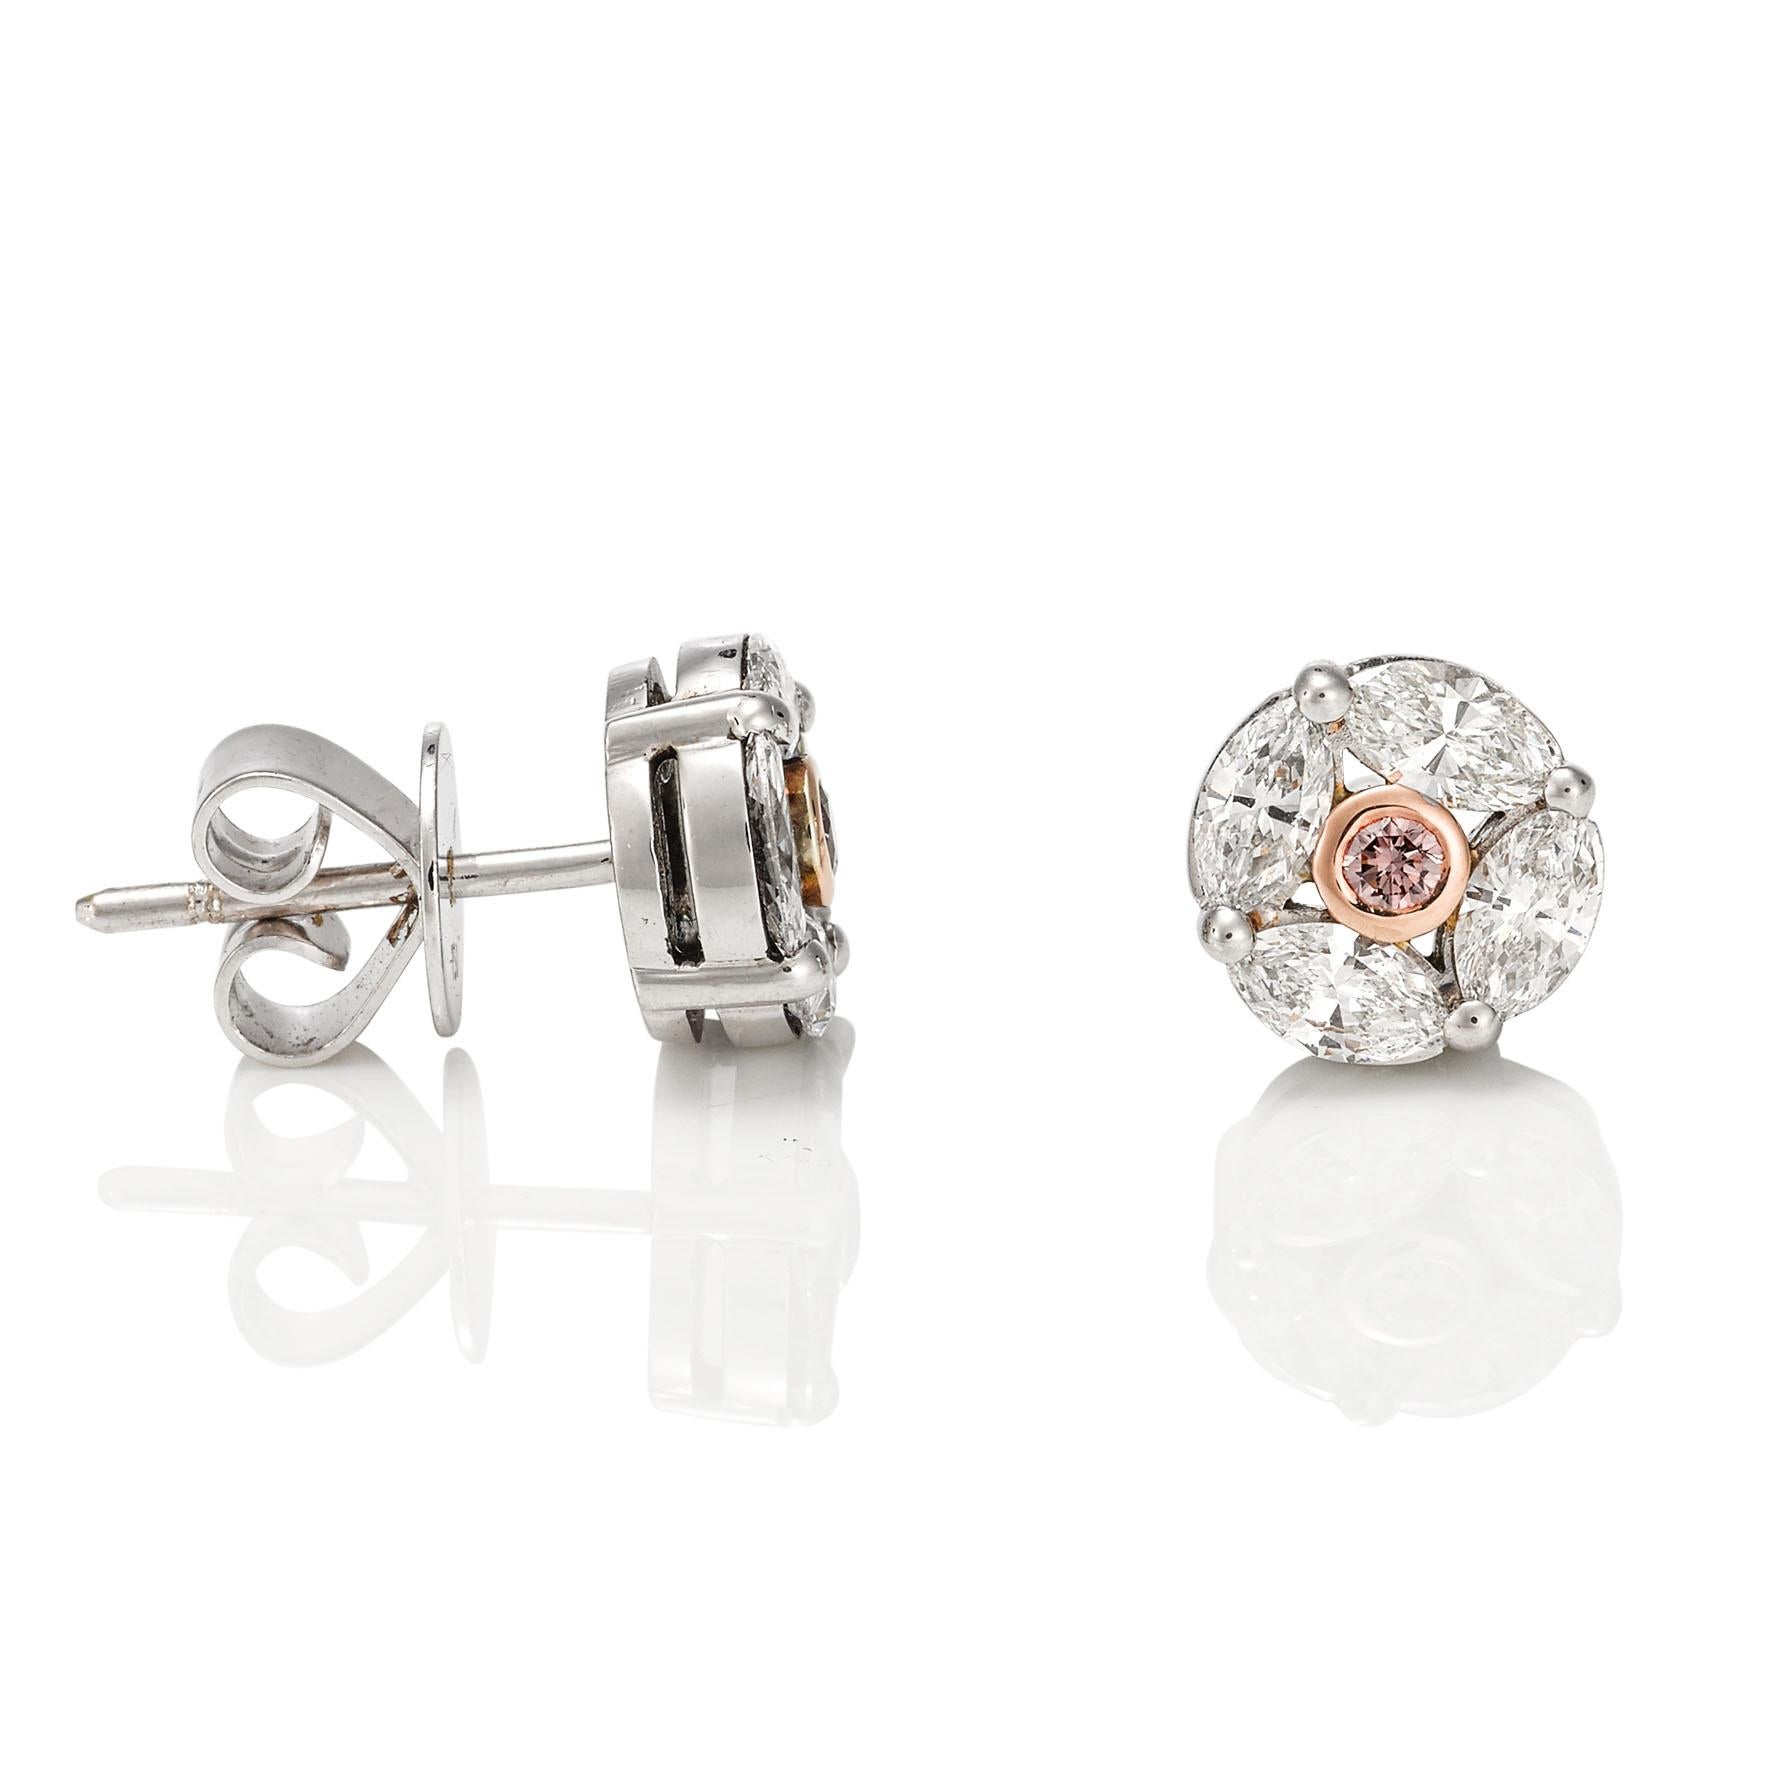 Giulians 18 karat rose and white gold diamond earrings.  Each earring features a round brilliant cut 0.05ct pink champagne diamond (PC1 - Si) set in 18 karat rose gold bezel setting.  The pink diamonds are surrounded by a cluster of 8 marquise cut